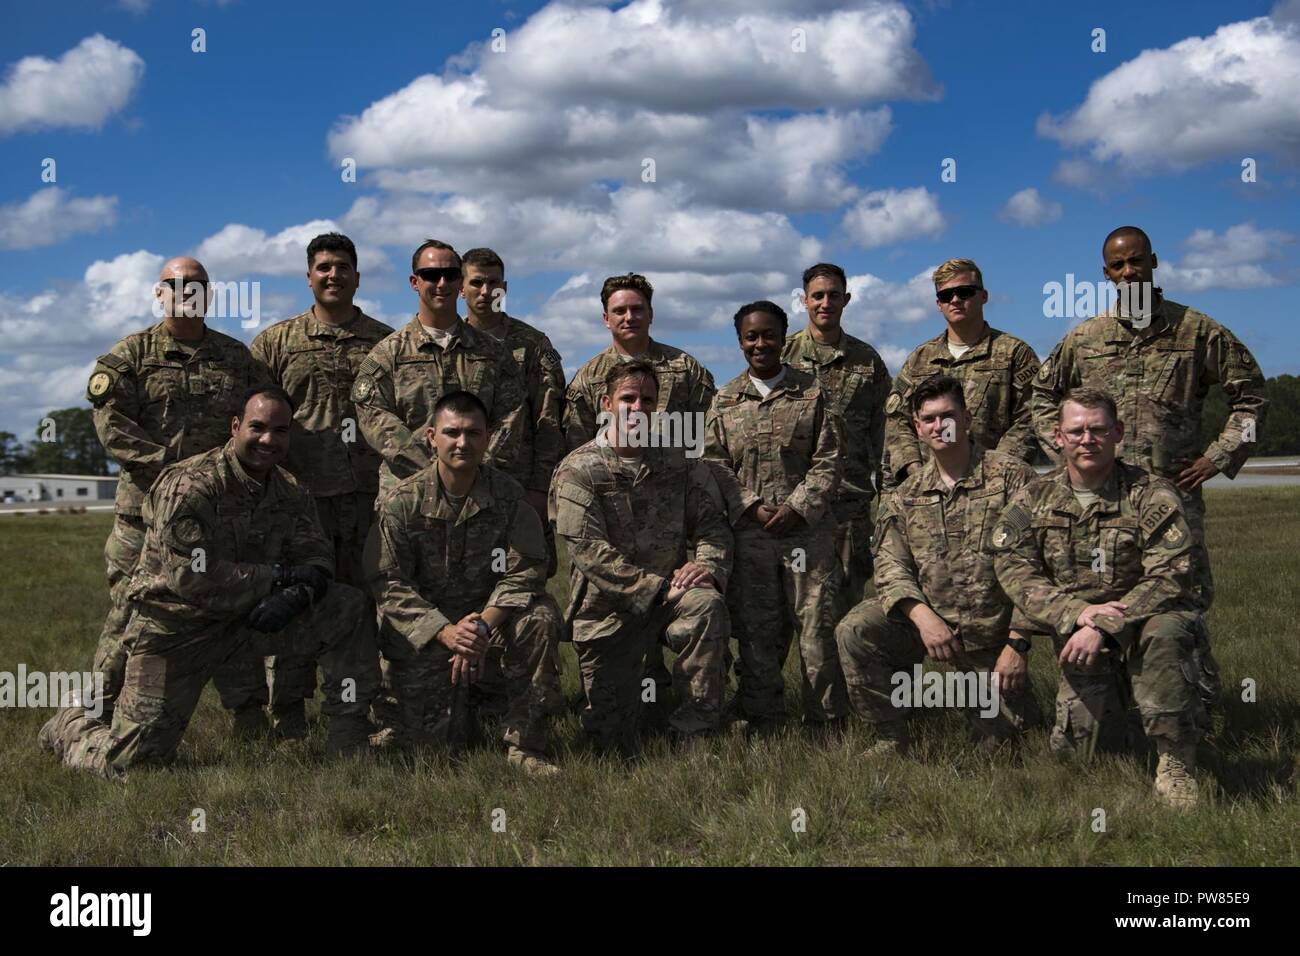 Members of the 820th Base Defense Group pose with Tech. Sgt. Joe Ostrum, 820th Combat Operations Squadron personal parachute program manager, front, third from the left, after he earned his senior-rated parachutist badge during a static-line jump, Oct. 3, 2017, at the Lee Fulp drop zone in Tifton, Ga. During a static-line jump, the jumper is attached to the aircraft via the ‘static-line’, which automatically deploys the jumpers’ parachute after they’ve exited the aircraft. Stock Photo